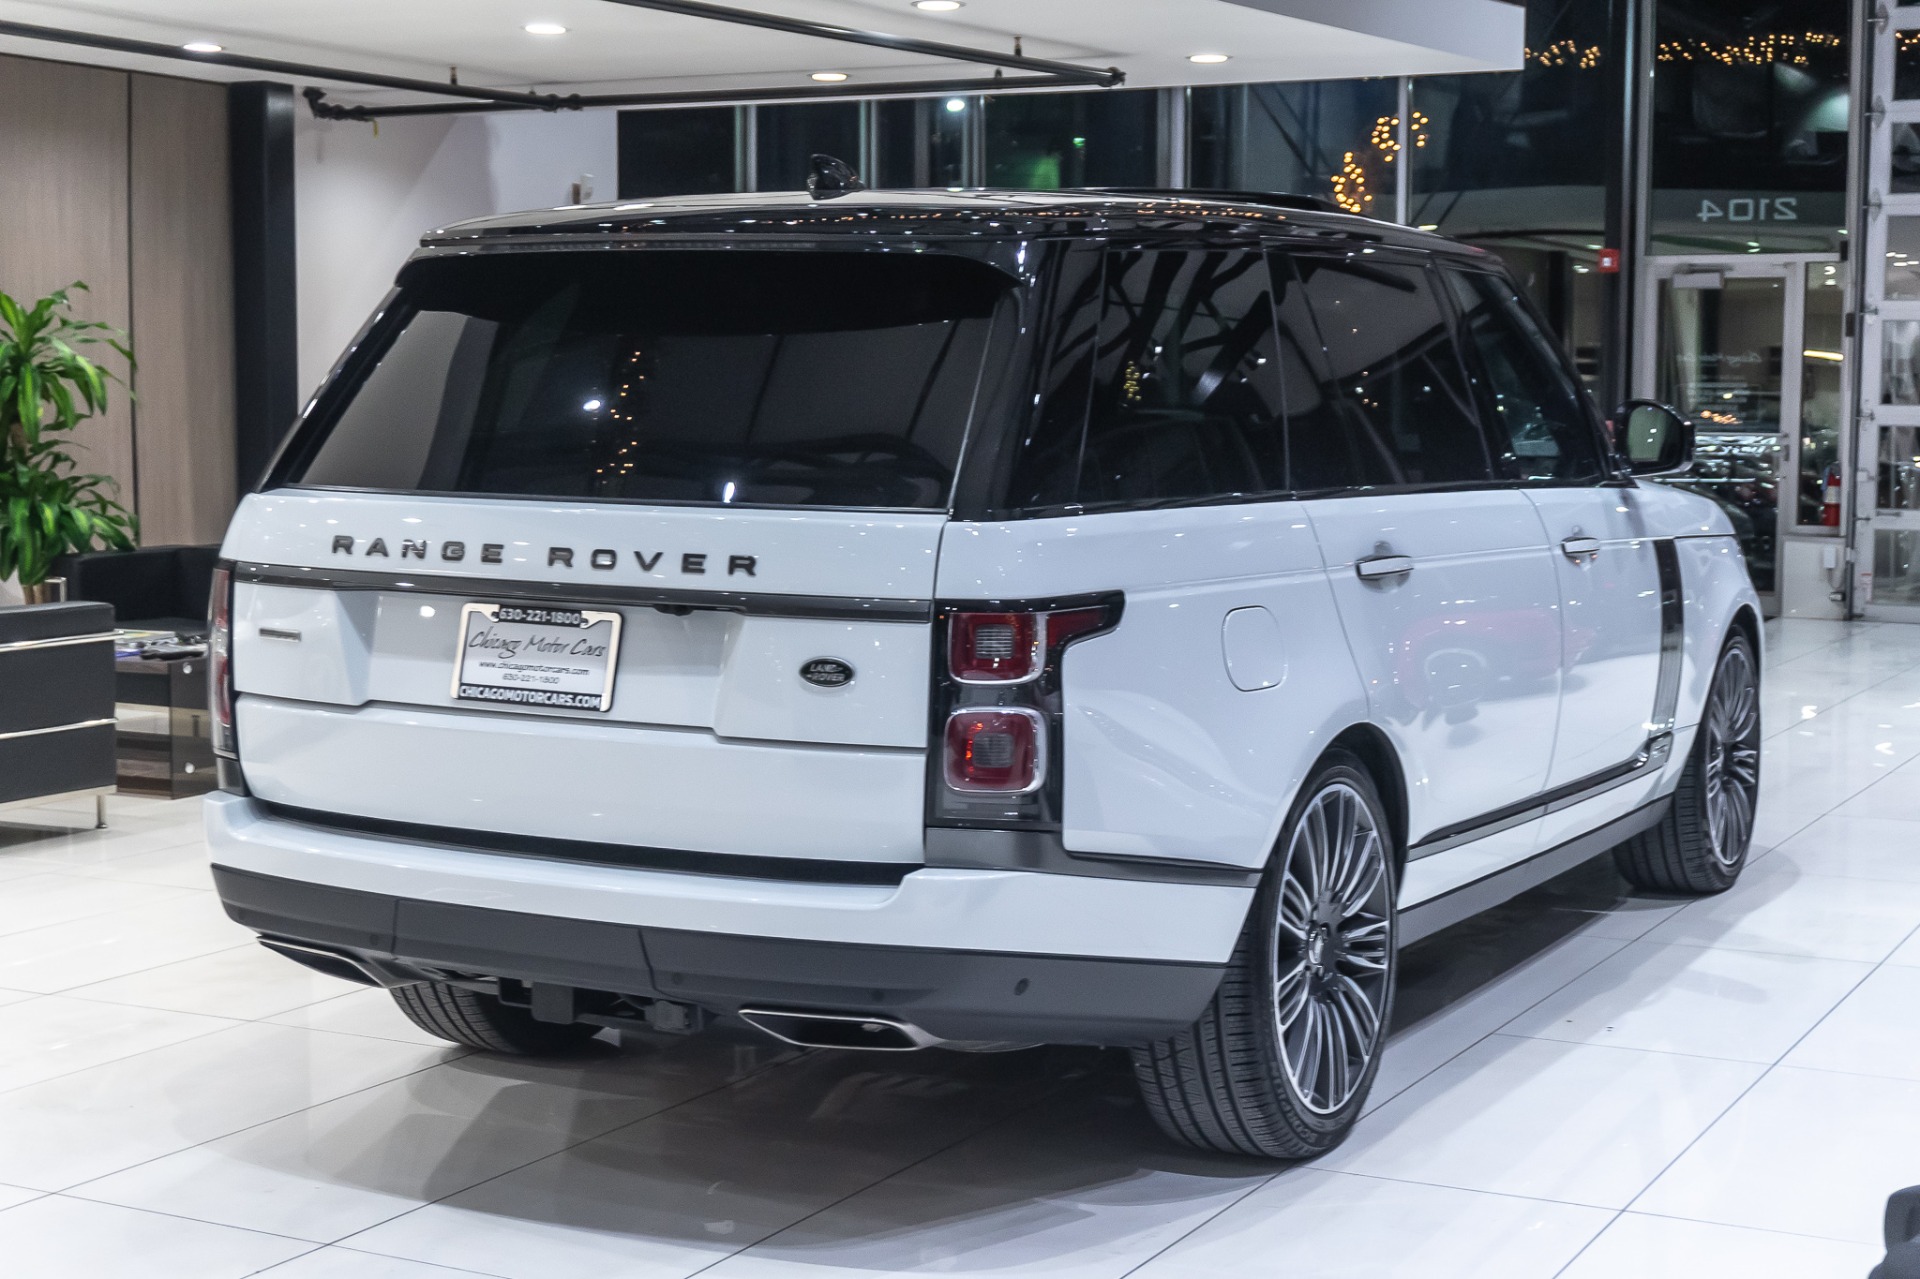 Range Rover Autobiography White  . Discover The Range Rover Autobiography, Designed And Crafted To Perfection To Combine Capability And Style.